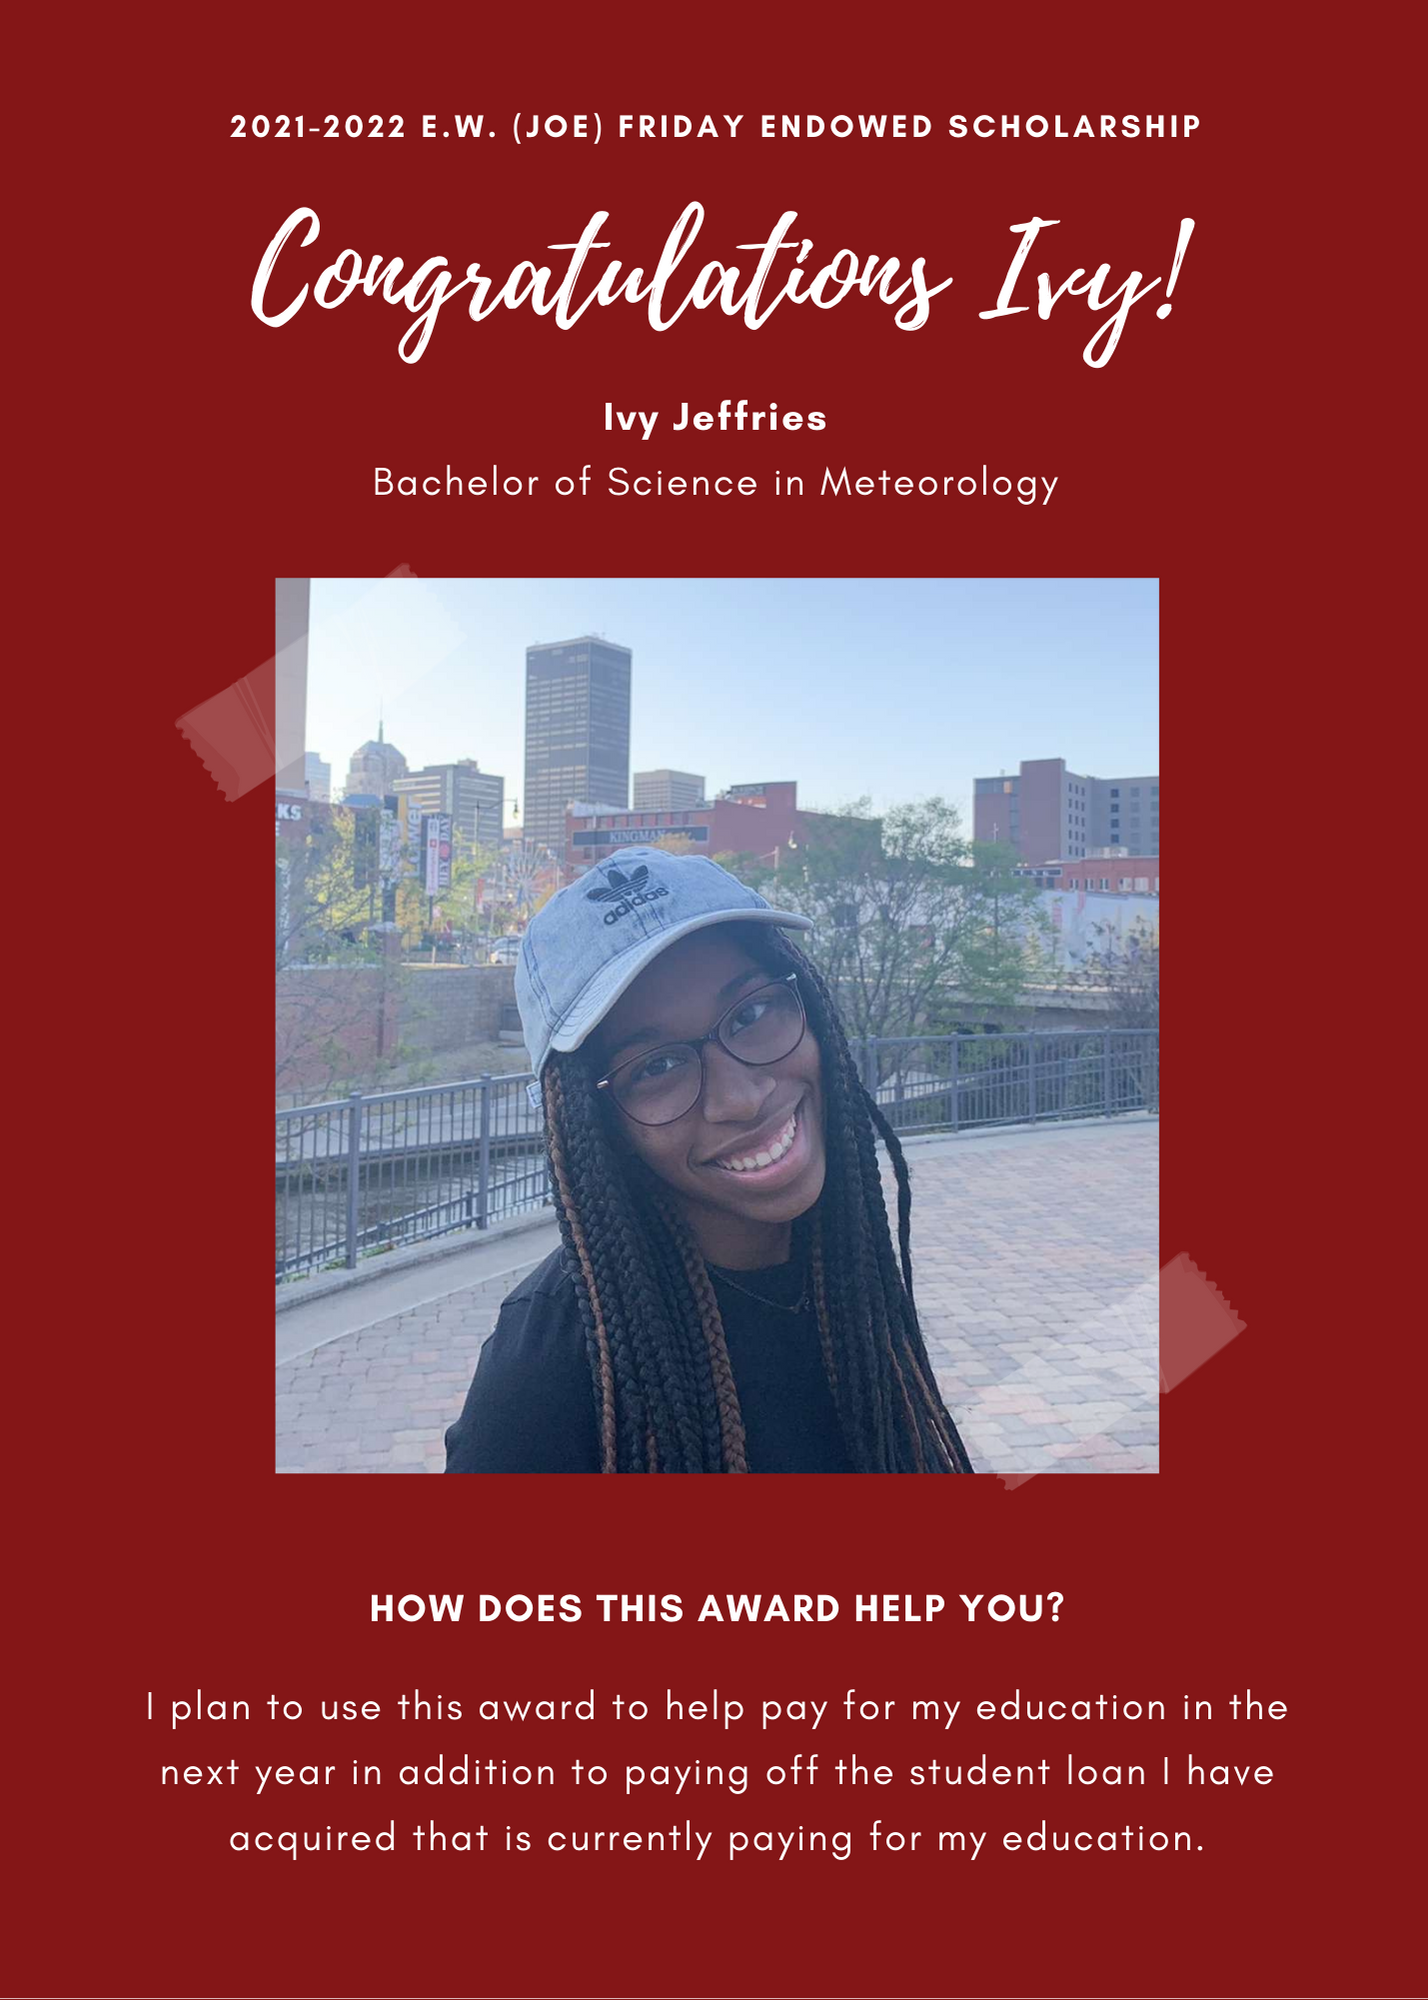 2021 -2022 A&GS E.W. (Joe) Friday Endowed Scholarship. Congratulations Ivy! Ivy Jeffries Bachelor of Science in Meteorology.  How does this award help you? I plan to use this award to help pay for my education in the next year in addition to paying off the student loan I have acquired that is currently paying for my education.